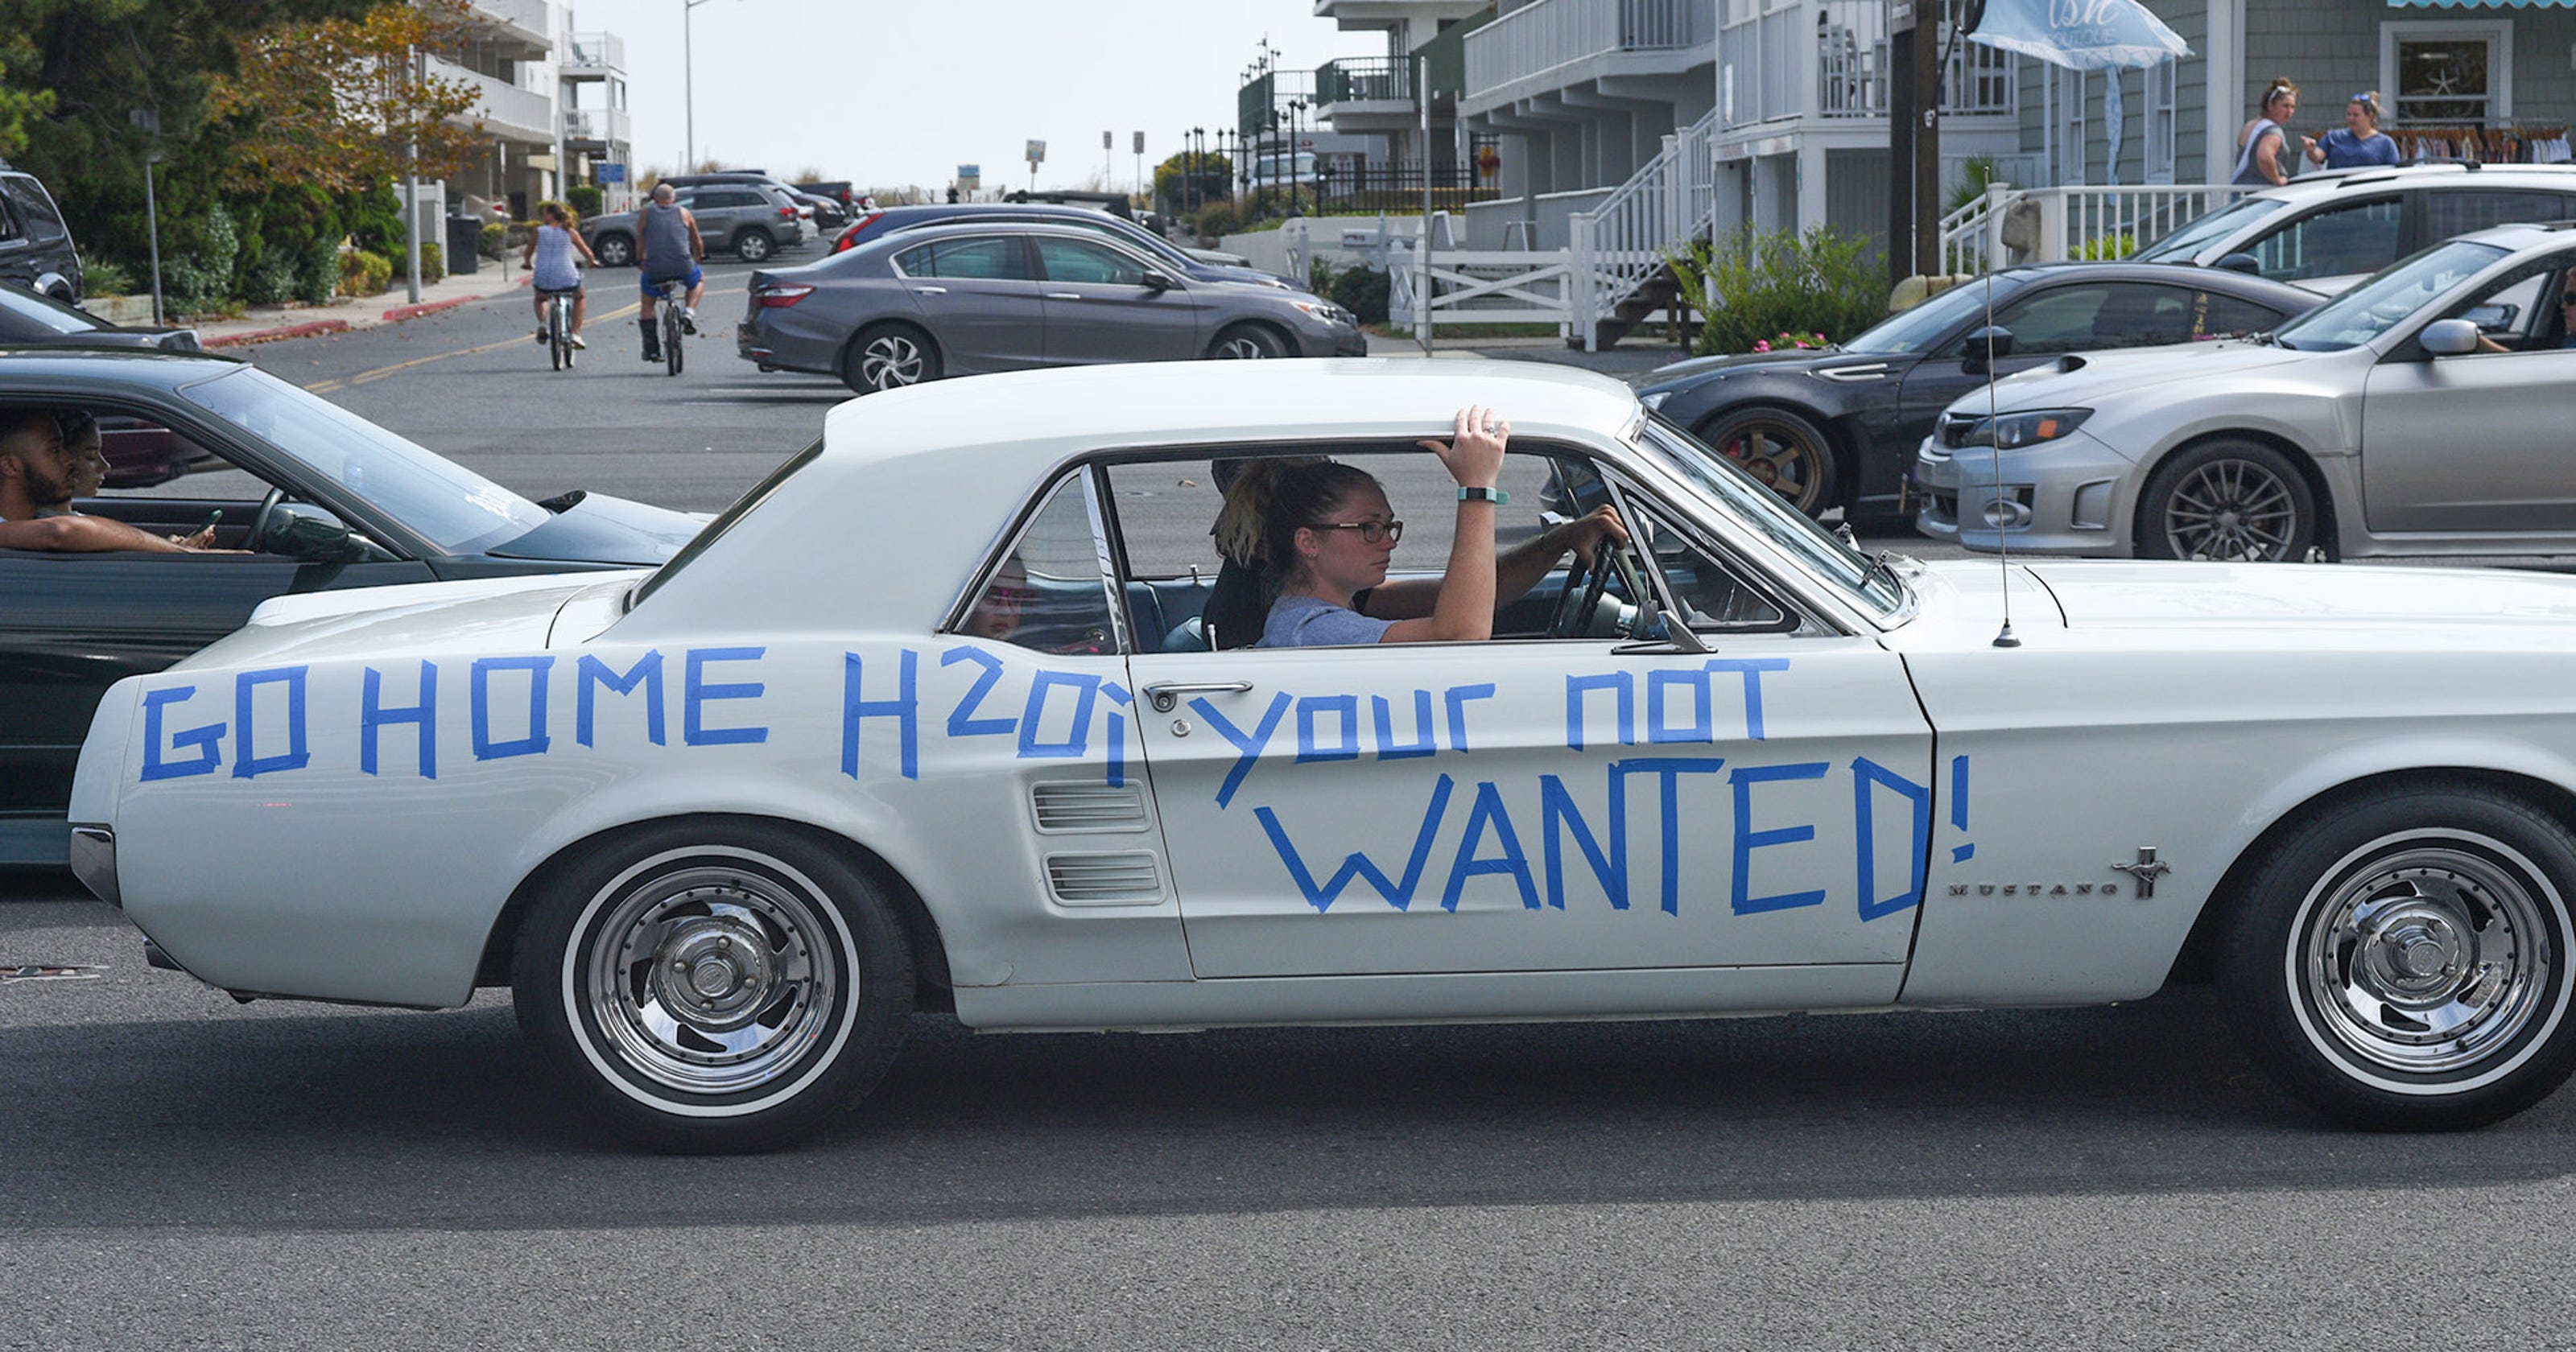 Unofficial H2Oi Ocean City mayor vows, this 'can't happen again"